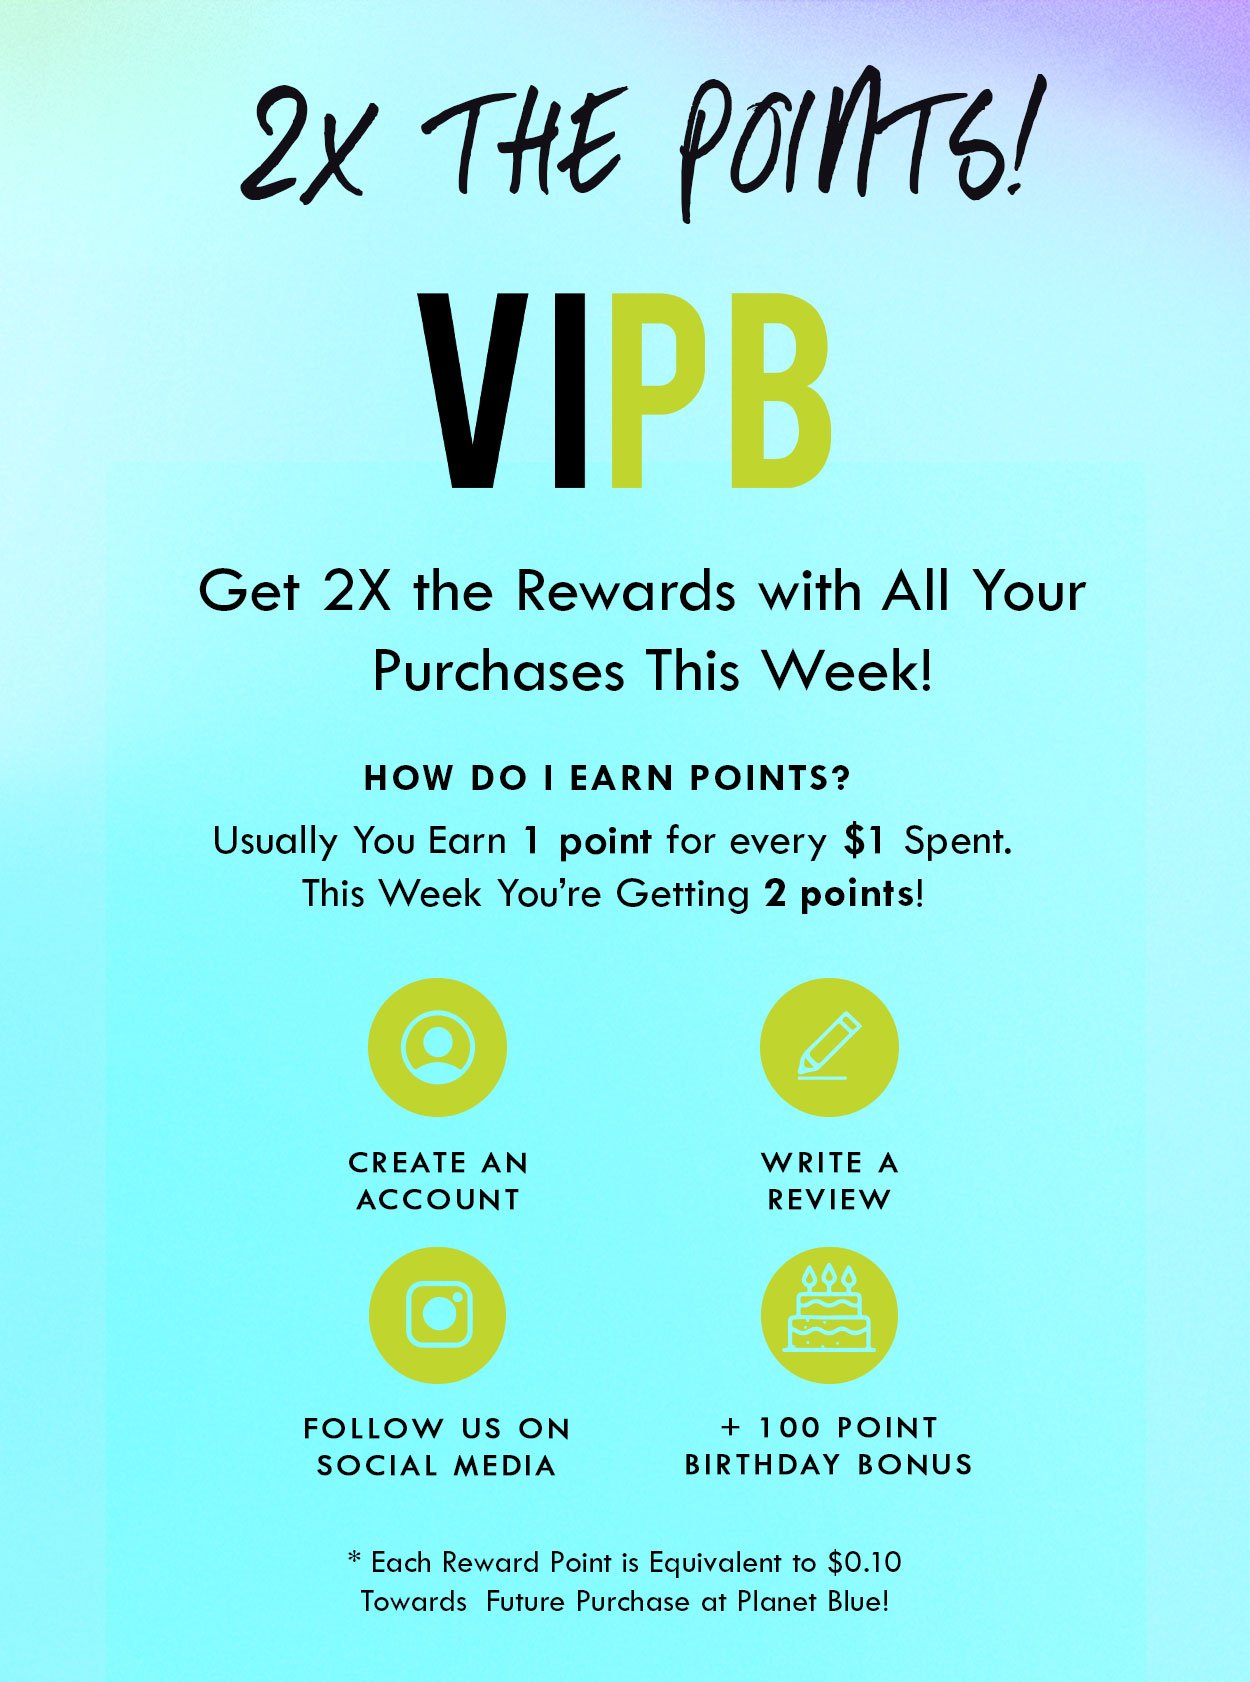 Join VIPB Today! Our new loyalty program allows you to earn points and unlock exclusive rewards!